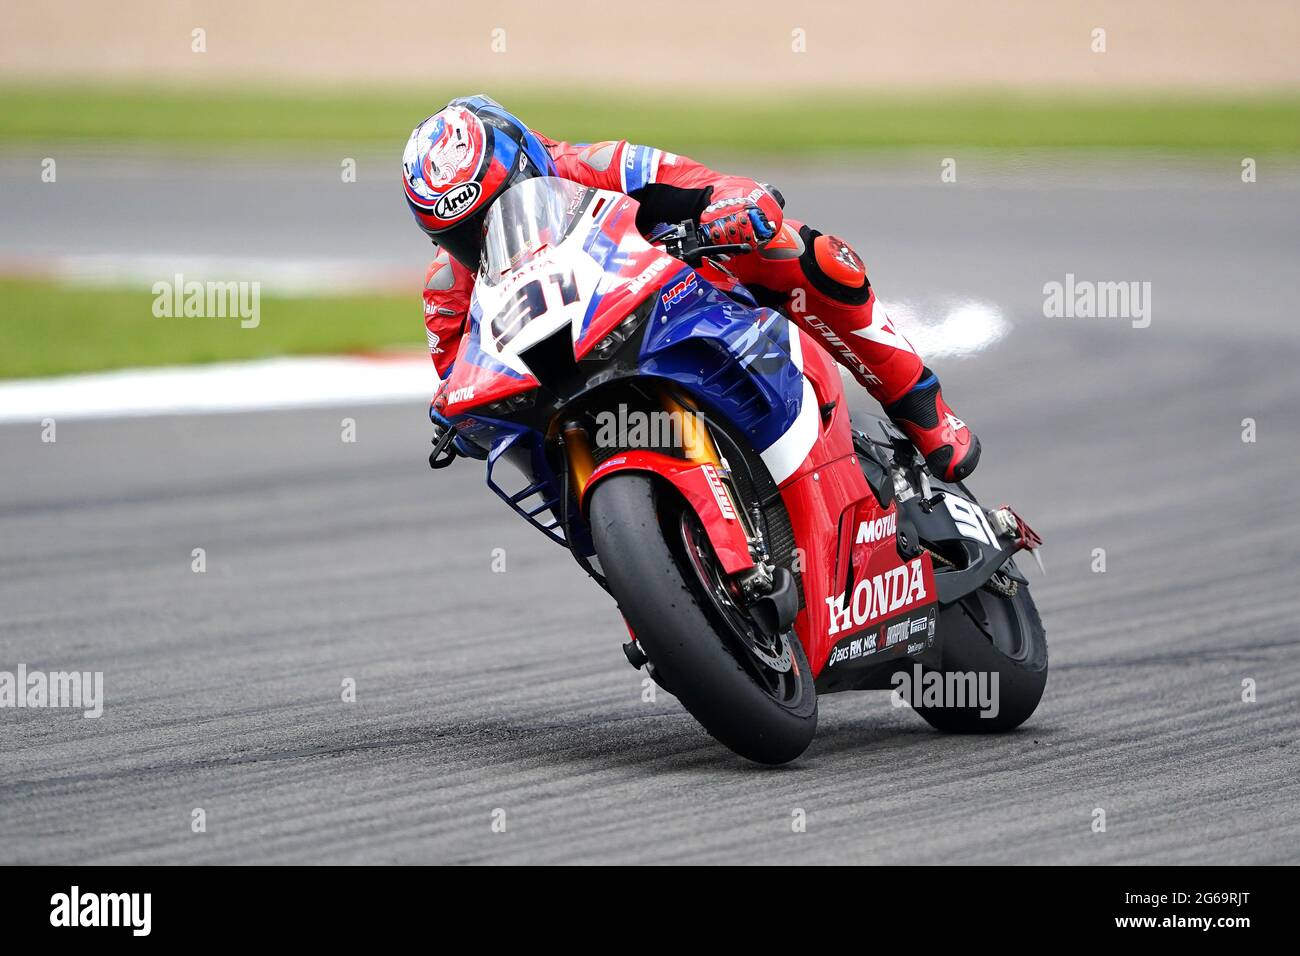 Leon Haslam of Team HRC in Race 2 during day two of the Motul Fim Superbike Championship 2021 at Donington Park, Leicestershire. Saturday July 4, 2021. Stock Photo